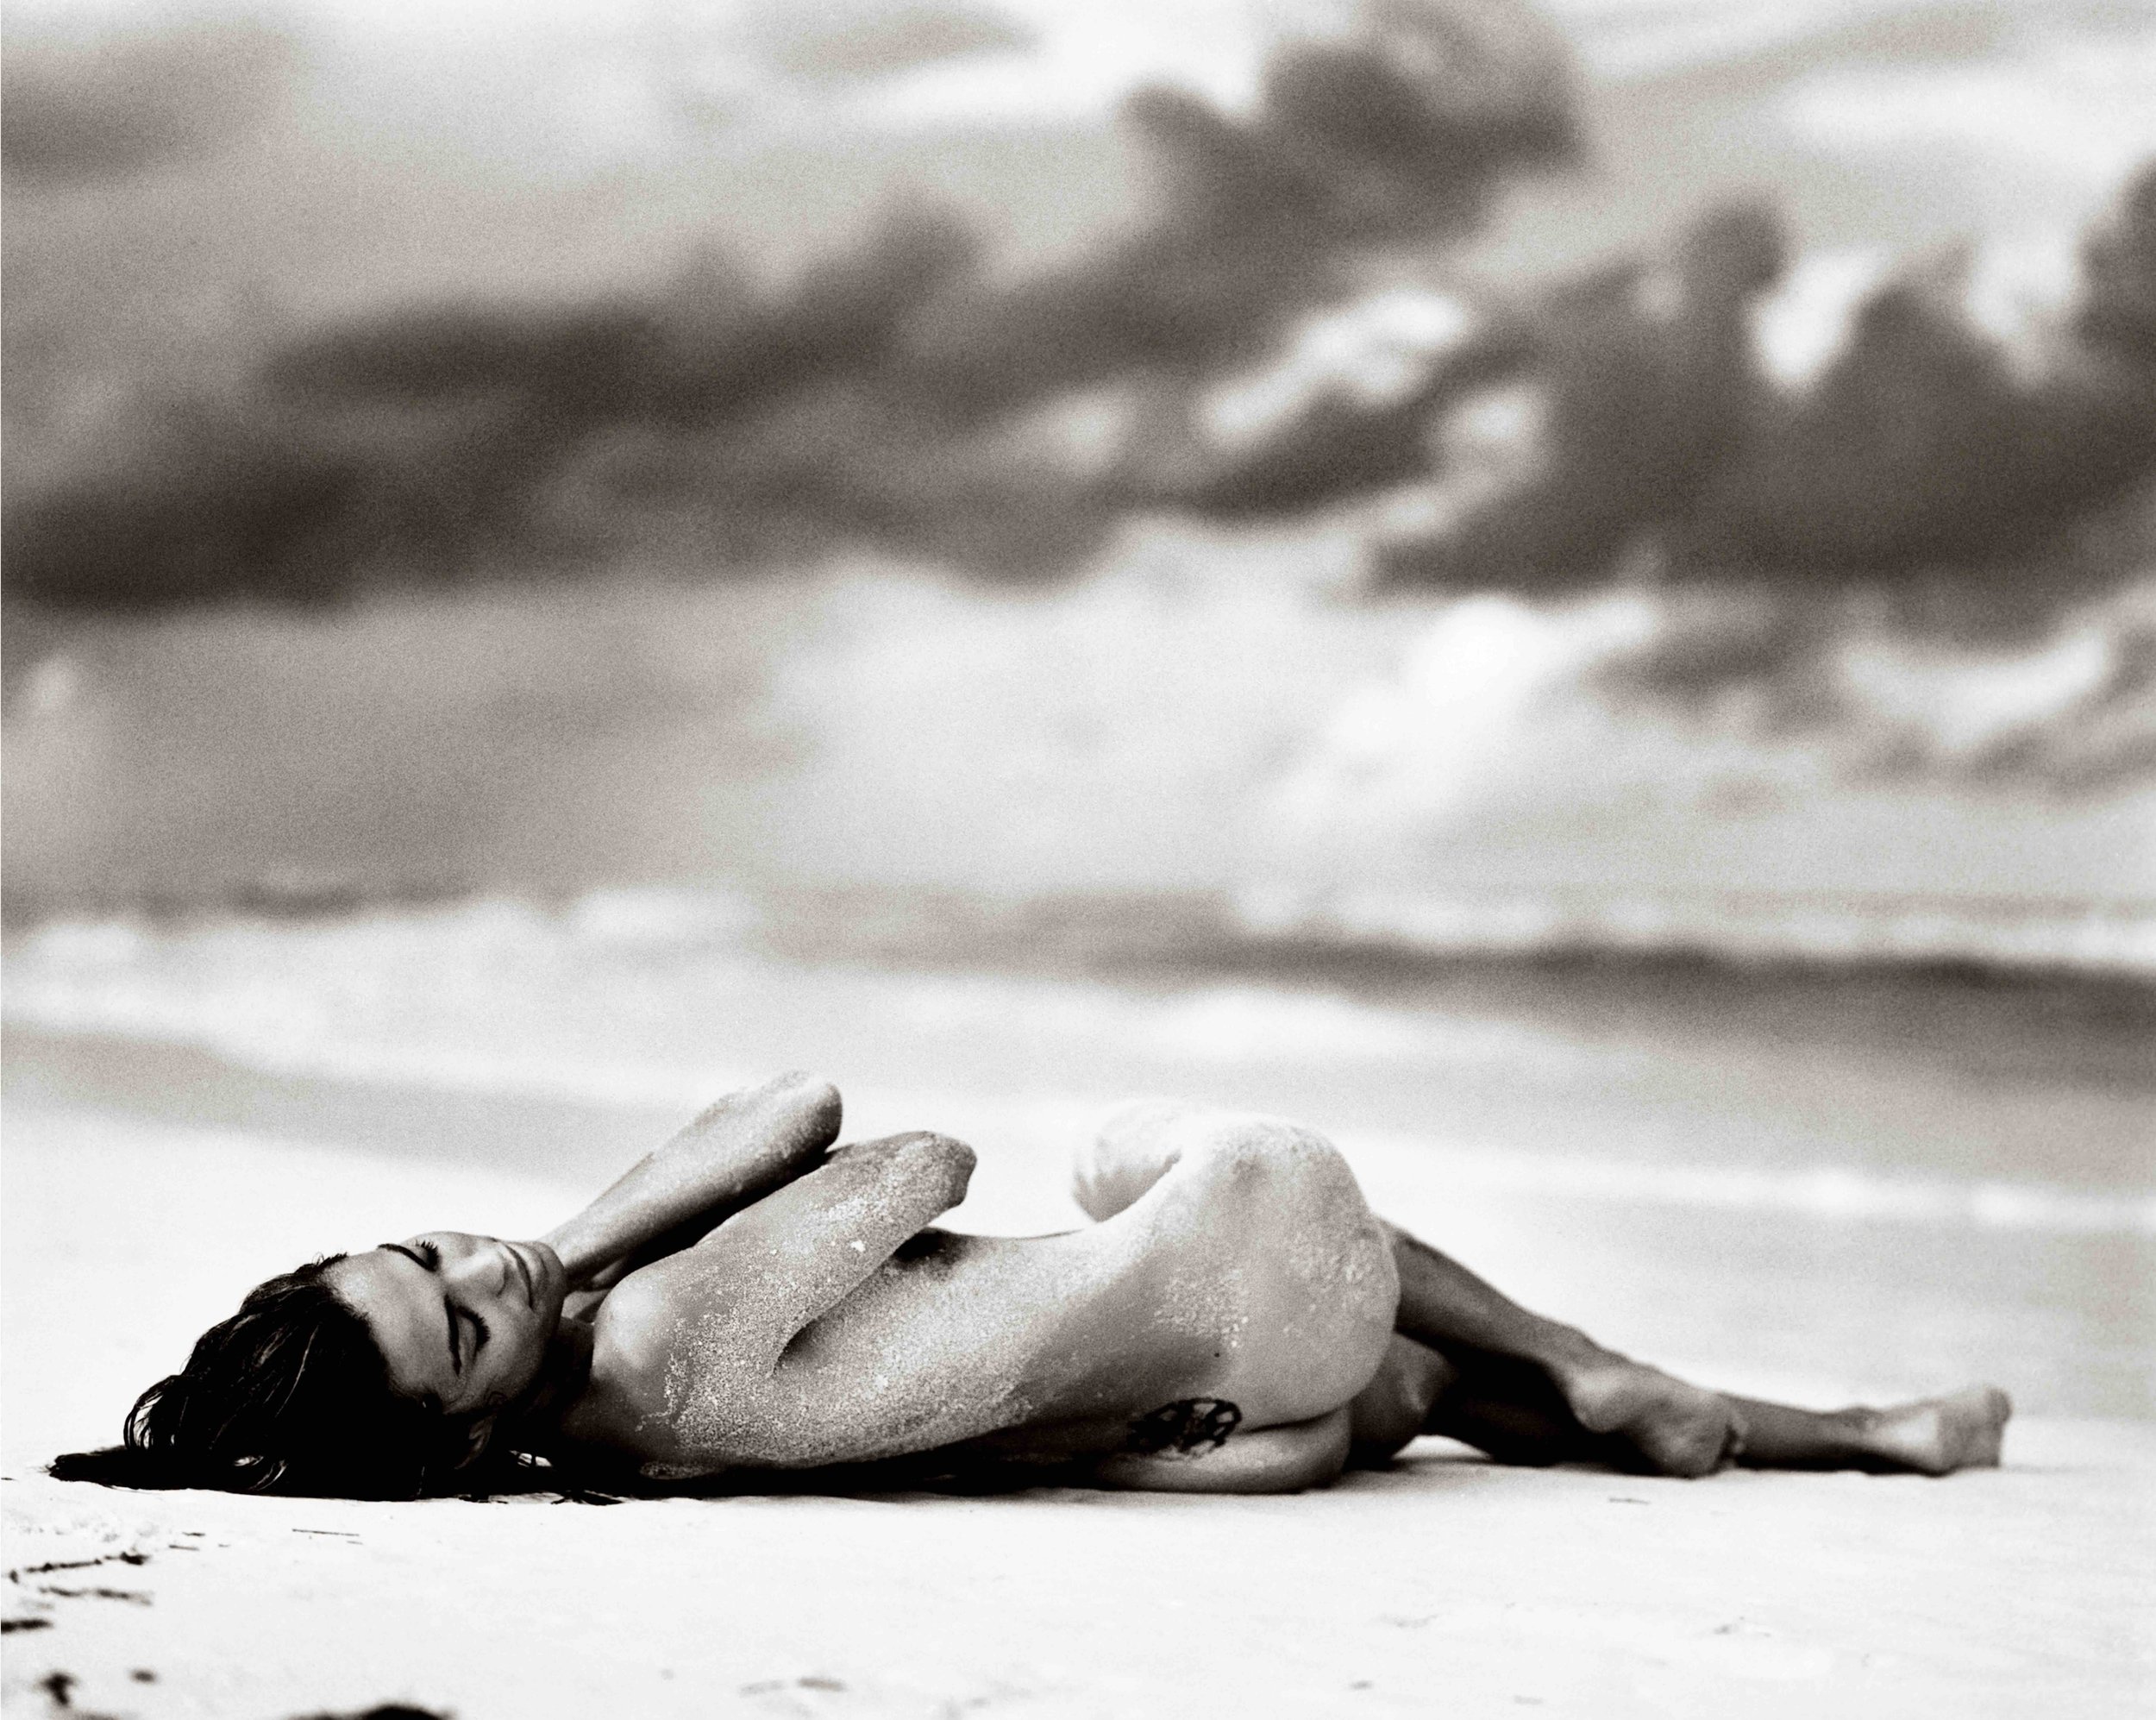  Michael Haber   Beach nude,  2003  100% Archival fine art print    Small: 30 x 40 in. Editions of 20, 25 and 30  Medium: 40 x 60 in. Editions of 20 and 25  Large: 50 X 70 in. Editions of 15 and 20  Extra Large: 50 X 96 in Editions of 10 